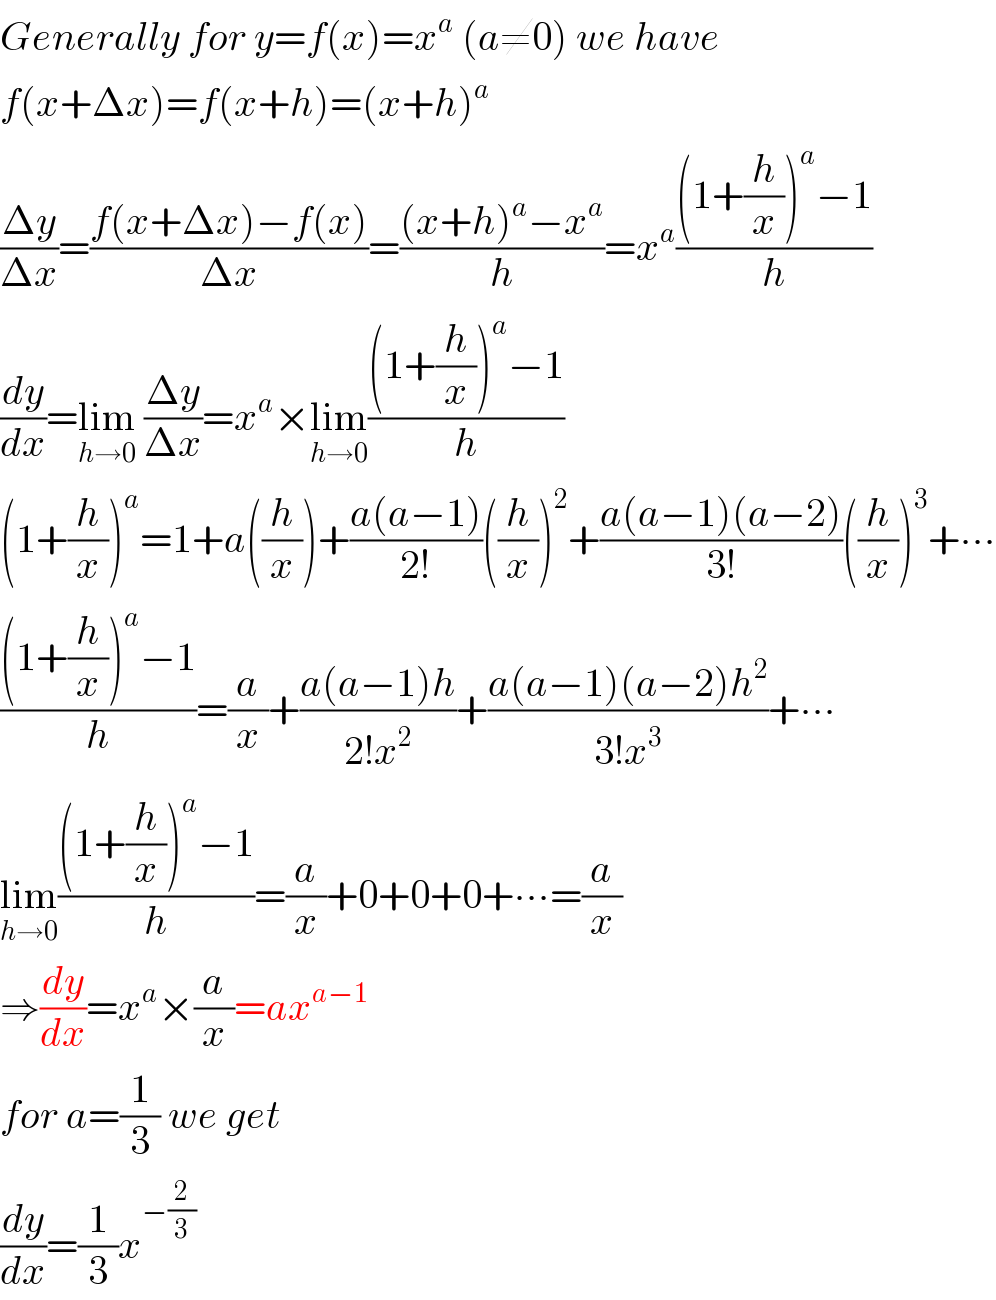 Generally for y=f(x)=x^a  (a≠0) we have  f(x+Δx)=f(x+h)=(x+h)^a   ((Δy)/(Δx))=((f(x+Δx)−f(x))/(Δx))=(((x+h)^a −x^a )/h)=x^a (((1+(h/x))^a −1)/h)  (dy/dx)=lim_(h→0)  ((Δy)/(Δx))=x^a ×lim_(h→0) (((1+(h/x))^a −1)/h)  (1+(h/x))^a =1+a((h/x))+((a(a−1))/(2!))((h/x))^2 +((a(a−1)(a−2))/(3!))((h/x))^3 +∙∙∙  (((1+(h/x))^a −1)/h)=(a/x)+((a(a−1)h)/(2!x^2 ))+((a(a−1)(a−2)h^2 )/(3!x^3 ))+∙∙∙  lim_(h→0) (((1+(h/x))^a −1)/h)=(a/x)+0+0+0+∙∙∙=(a/x)  ⇒(dy/dx)=x^a ×(a/x)=ax^(a−1)   for a=(1/3) we get  (dy/dx)=(1/3)x^(−(2/3))   